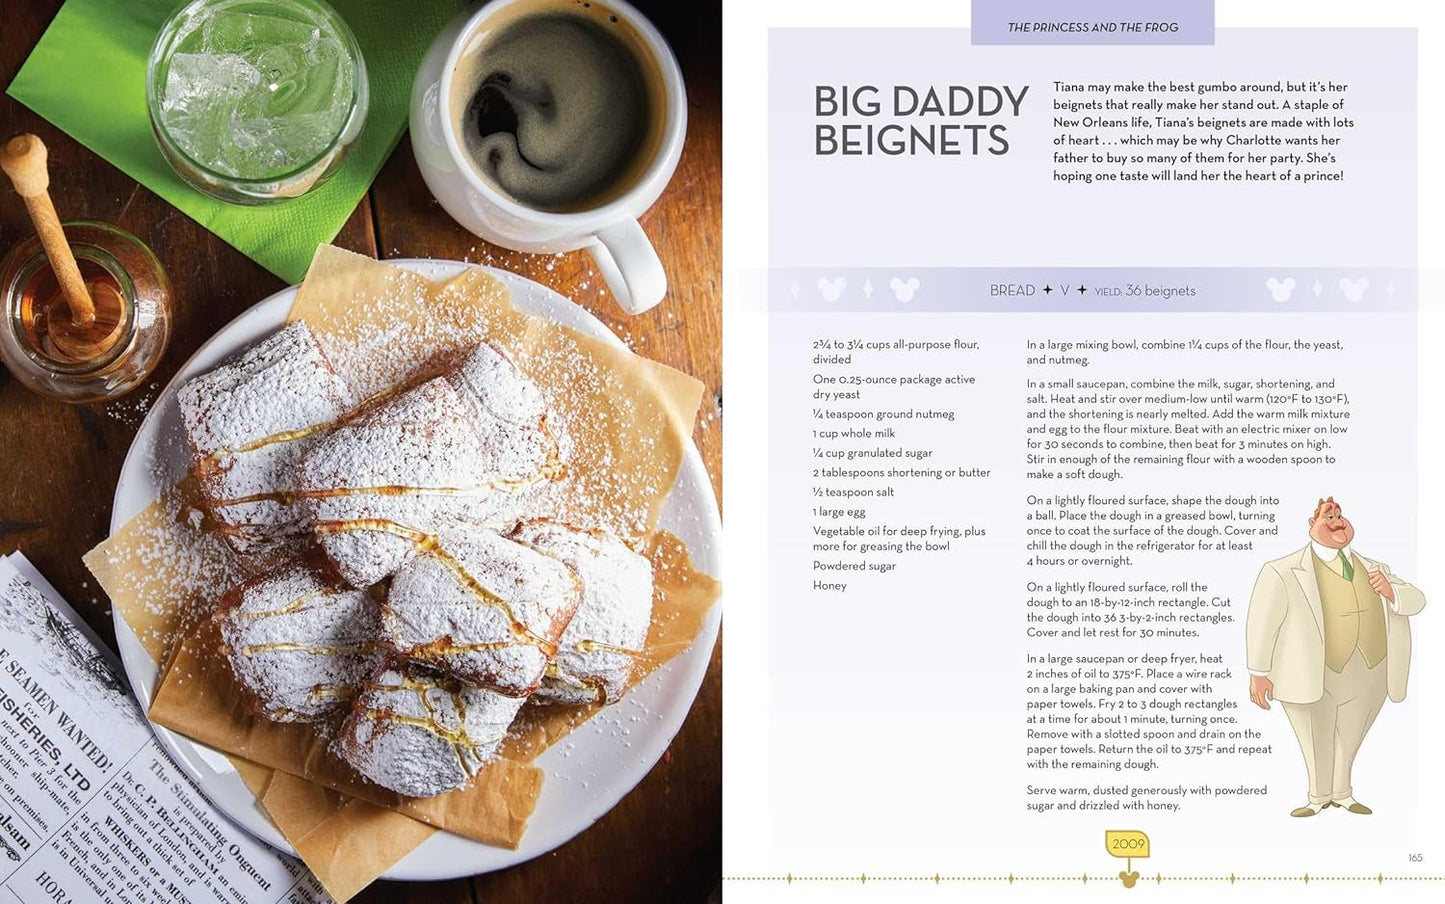 A two-page spread from the book. On the left is a plate of beignets on a plate, covered in powdered sugar. Around the plate are a mug of coffee, a glass of water, and a jar of honey. On the right is a recipe for Big Daddy Beignets.